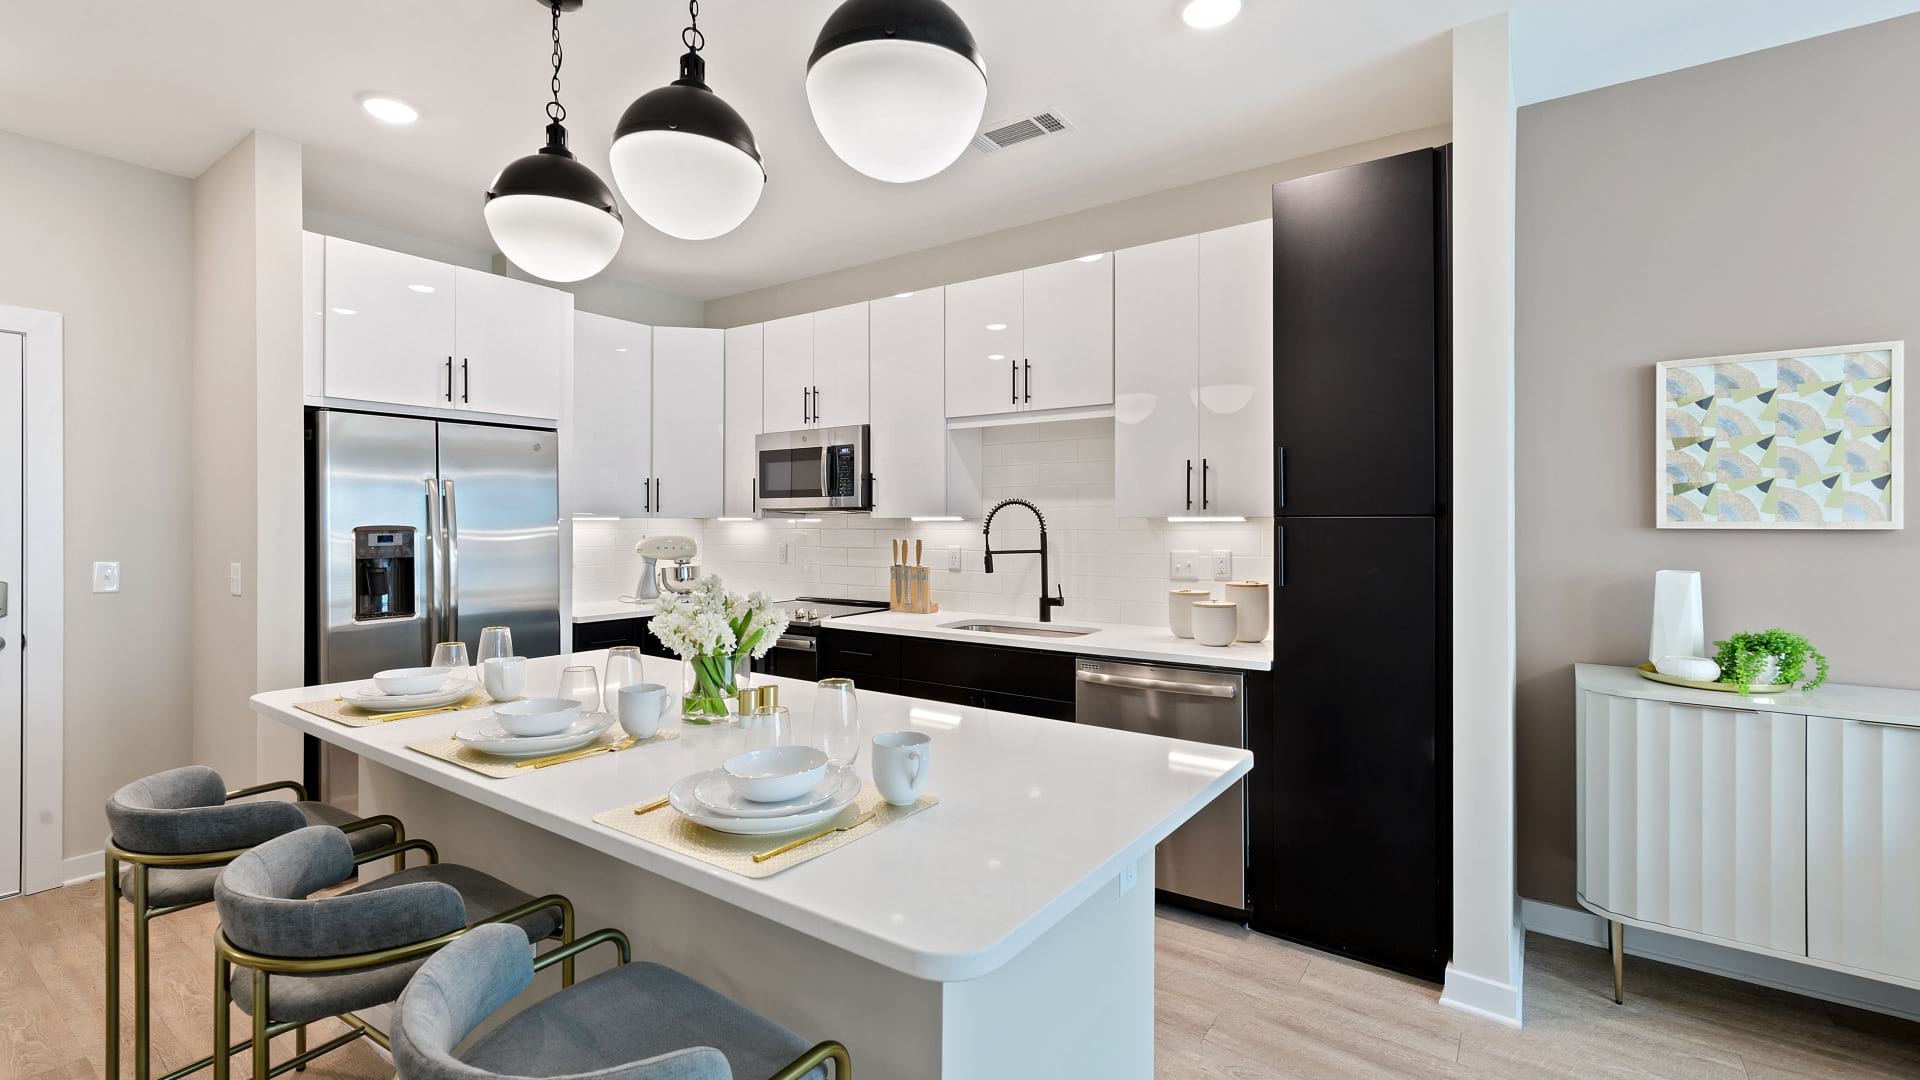 Modern kitchen at our luxury apartments in Durham, NC